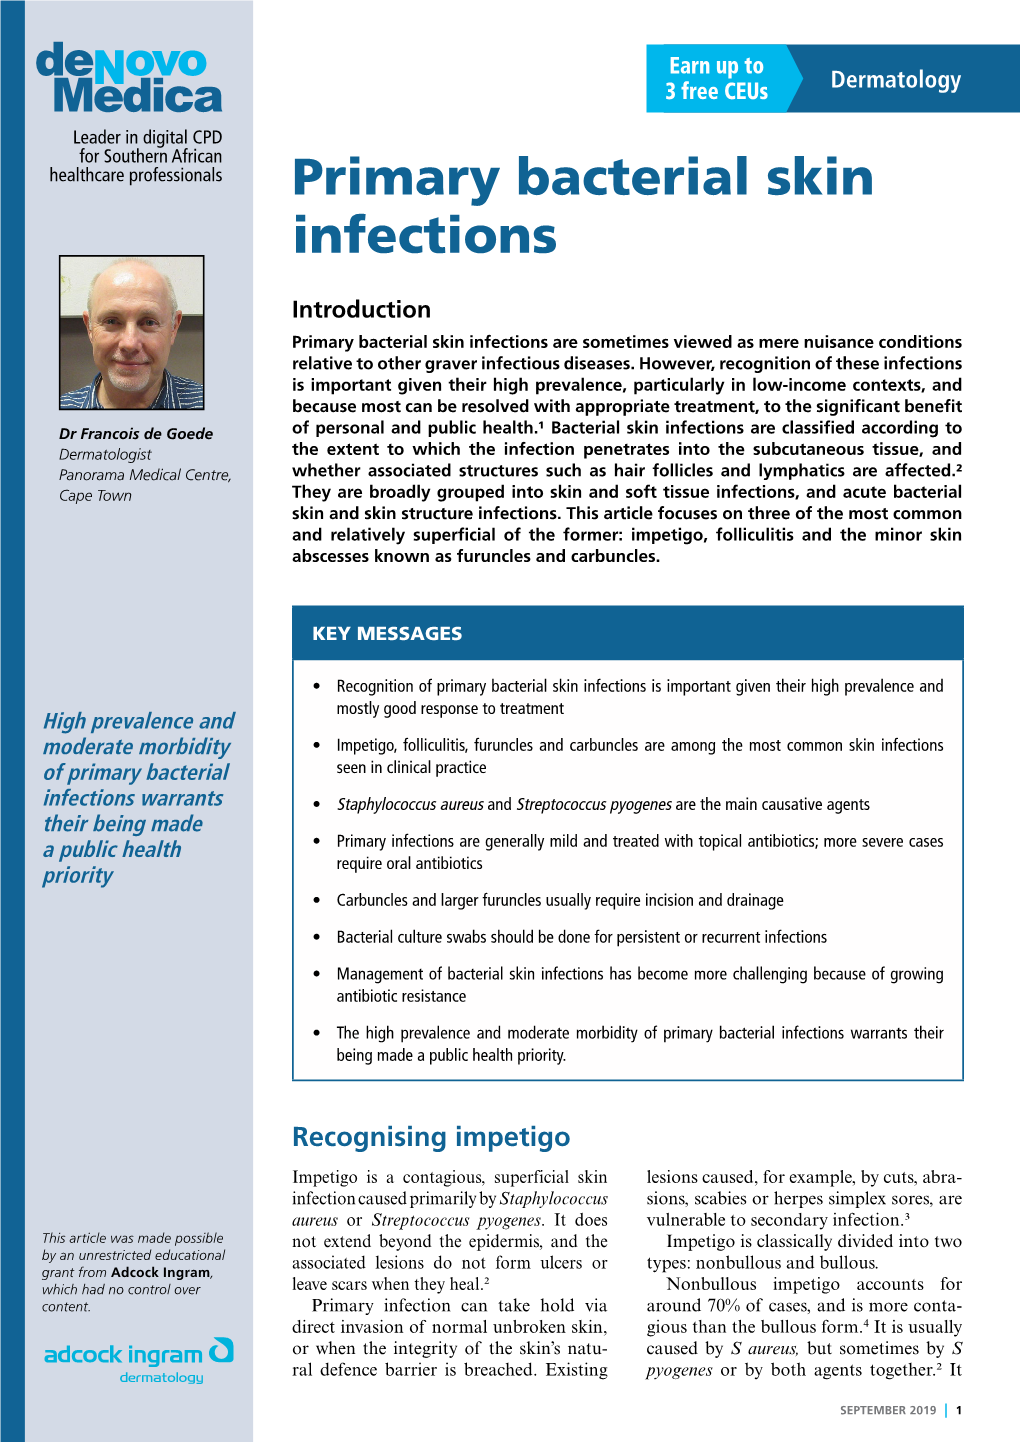 Primary Bacterial Skin Infections